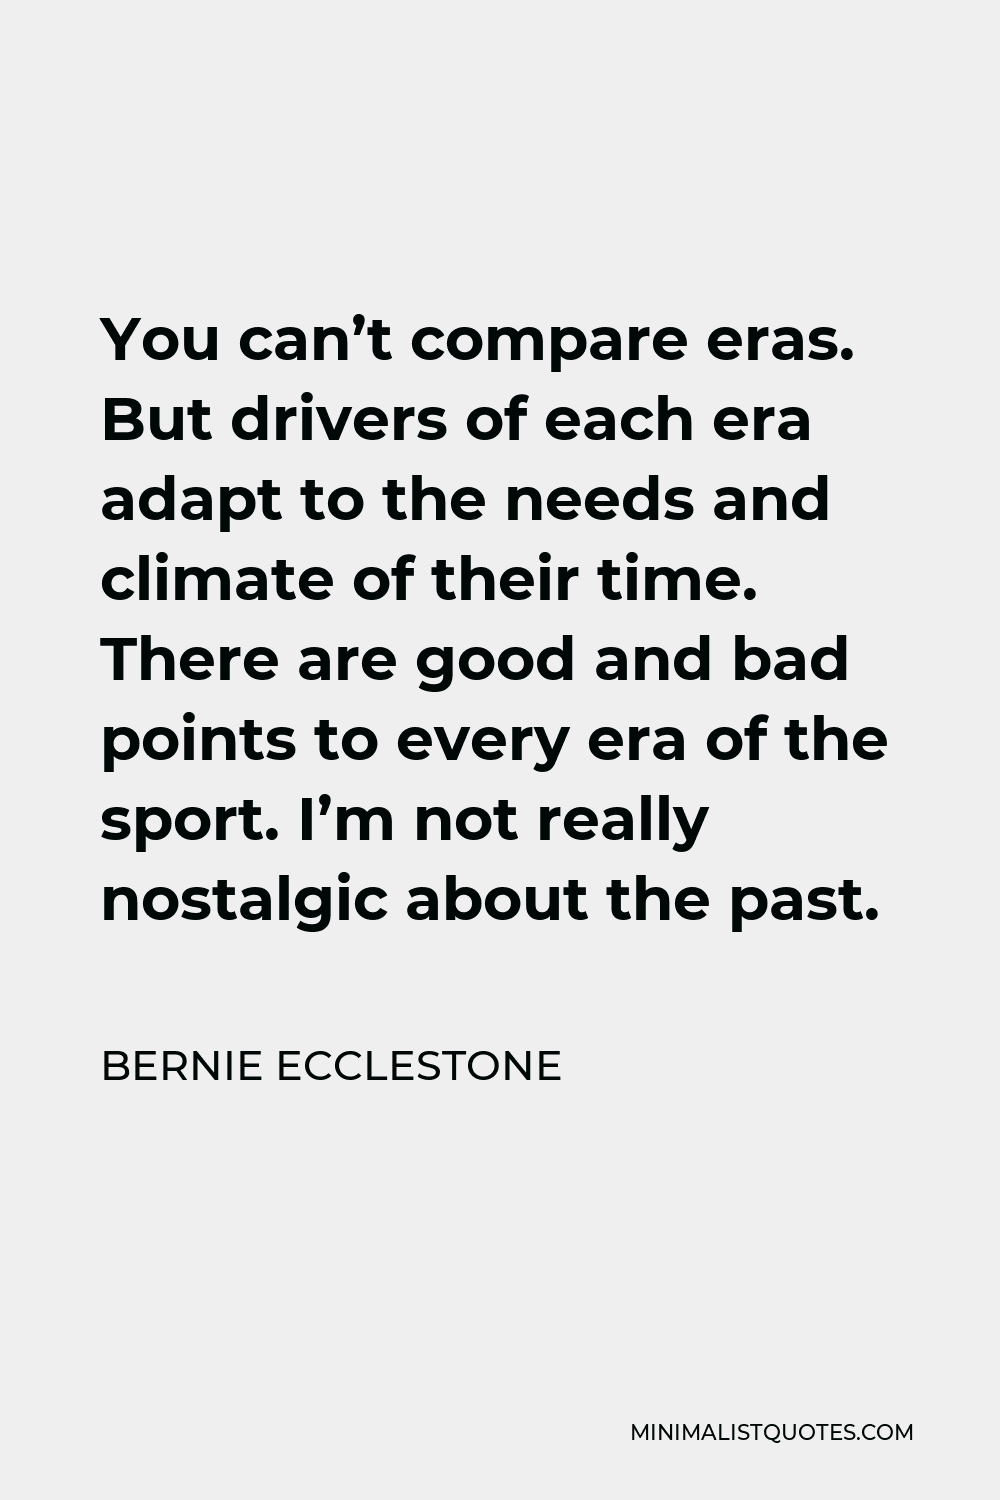 Bernie Ecclestone Quote - You can’t compare eras. But drivers of each era adapt to the needs and climate of their time. There are good and bad points to every era of the sport. I’m not really nostalgic about the past.